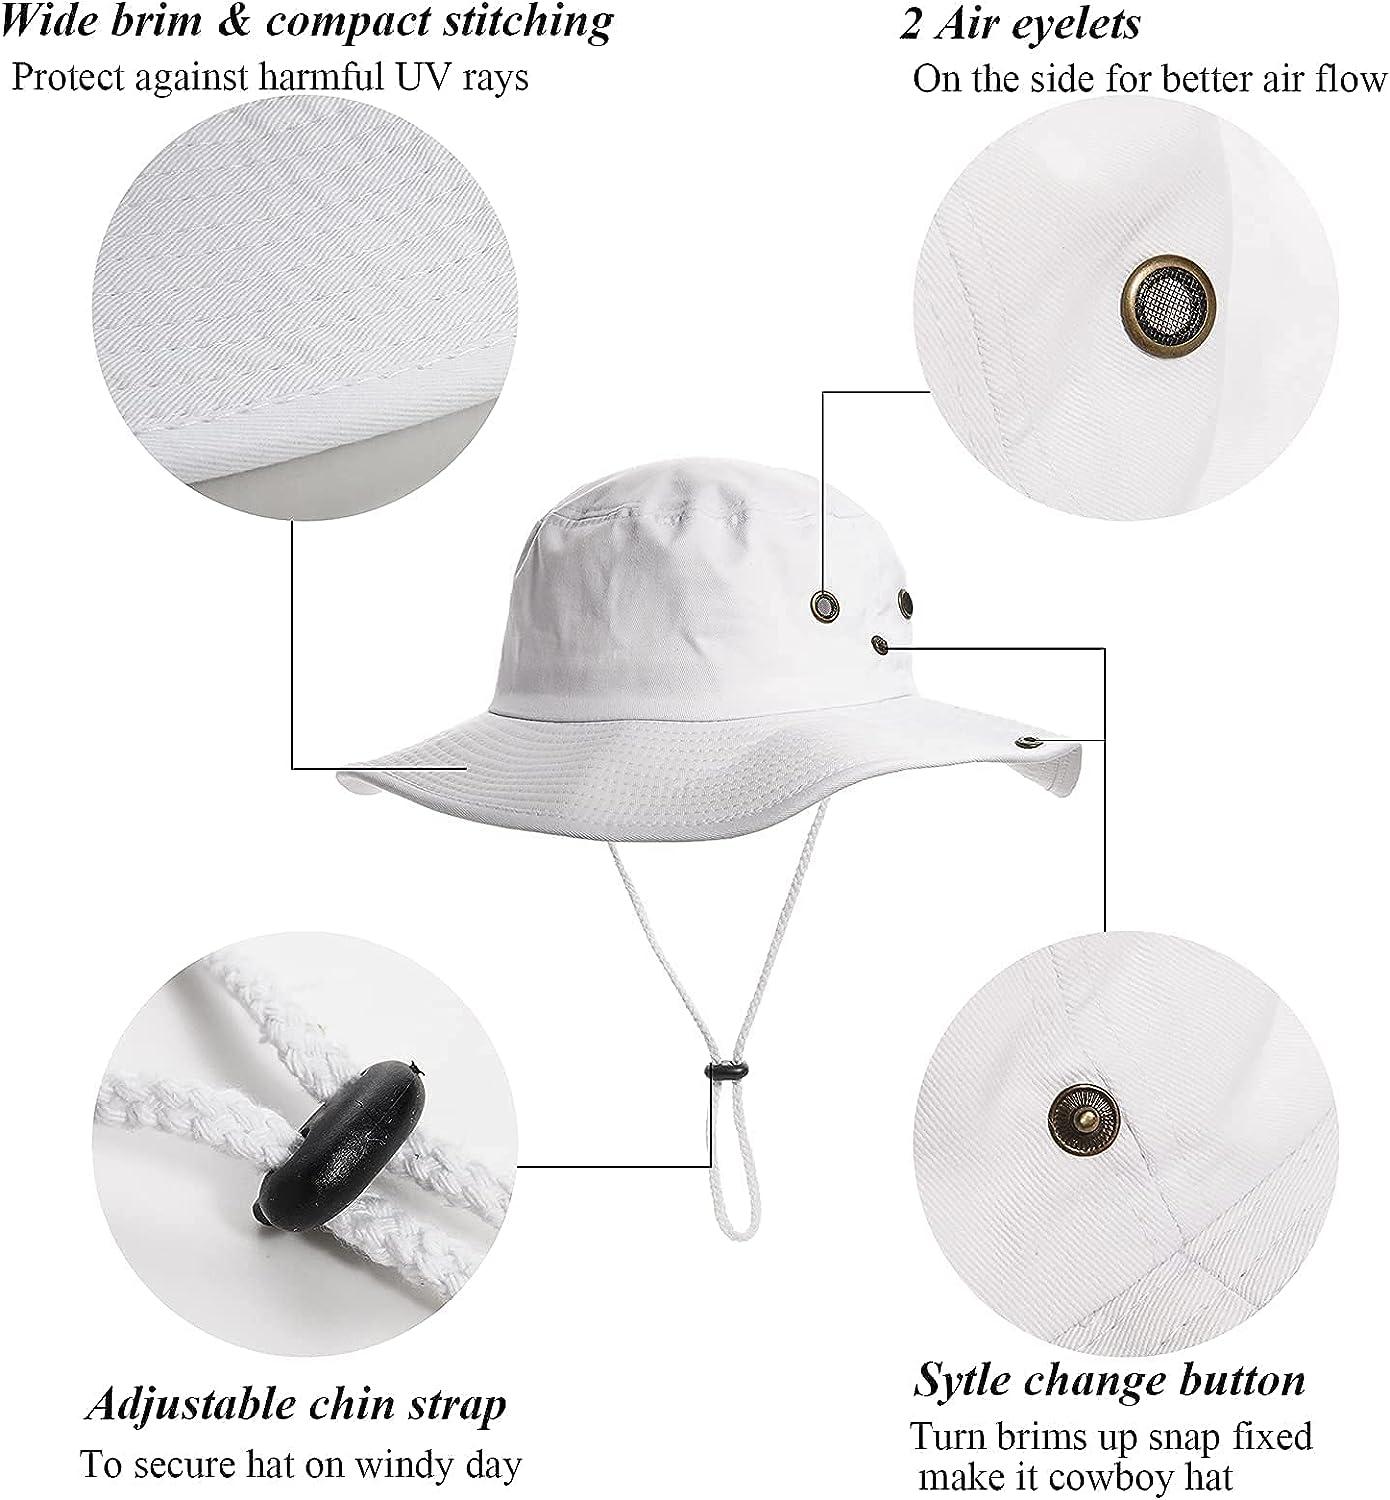 Sun-Hats-for-Men-with-UV-Protection-Wide-Brim Bucket Fishing Safari Boonie  Hat for Summer (XL 23 5/8-24) White X-Large